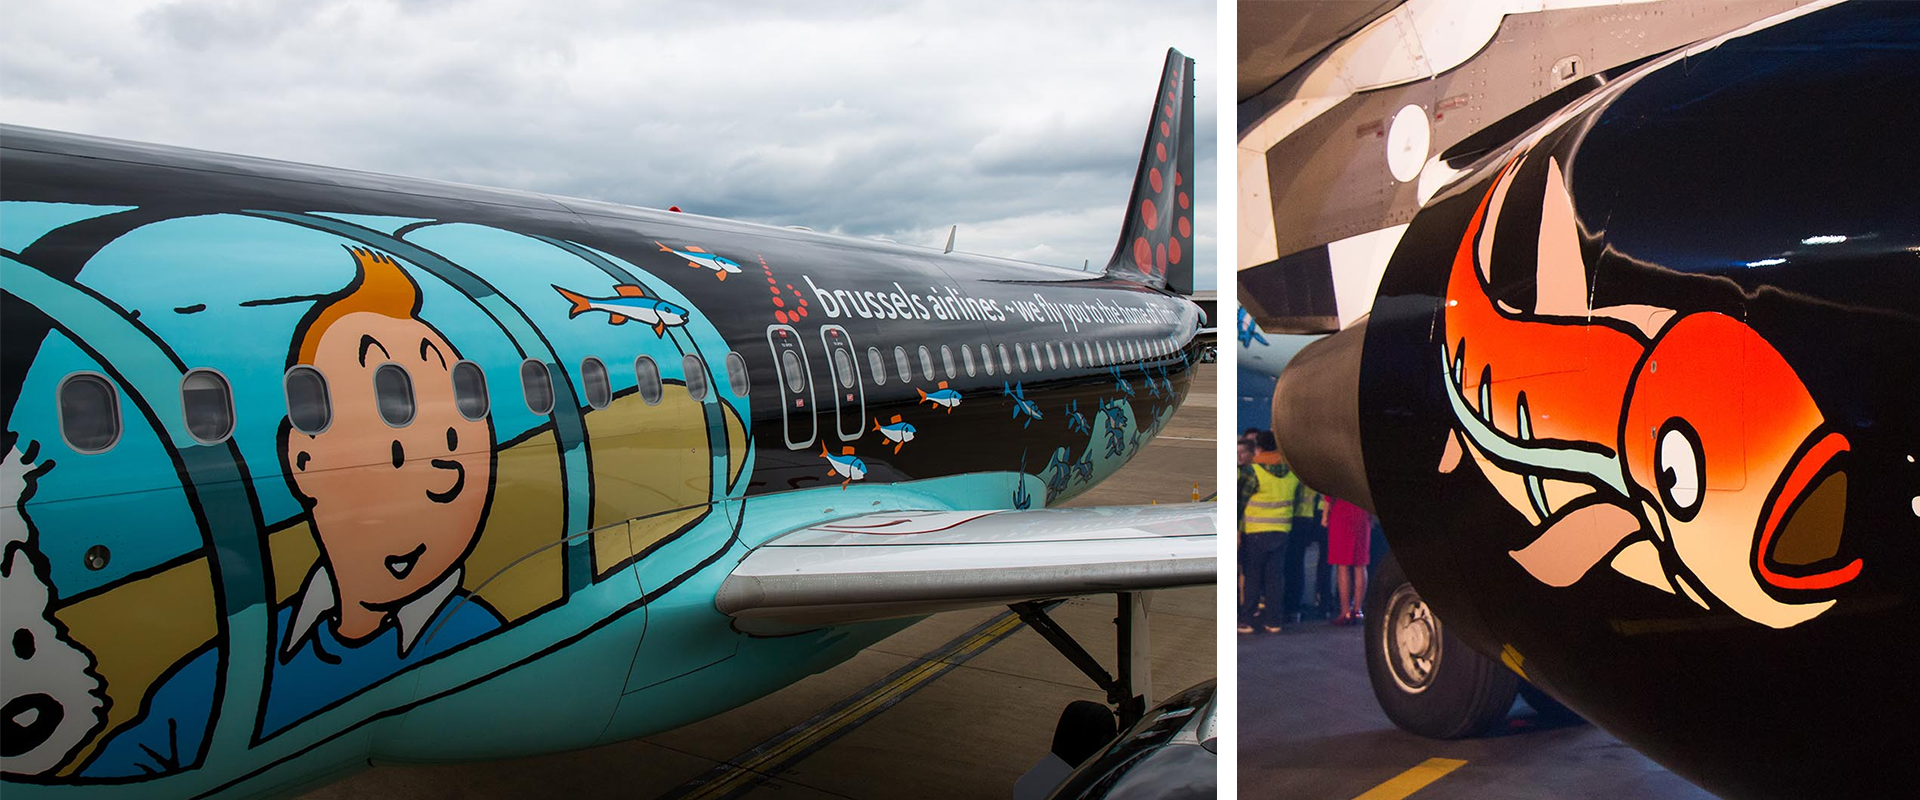 7 of the most unusual and impressive aircraft liveries, MTB Events. Image shows a Brussels Airlines aircraft painted with images from the comic of Tintin.